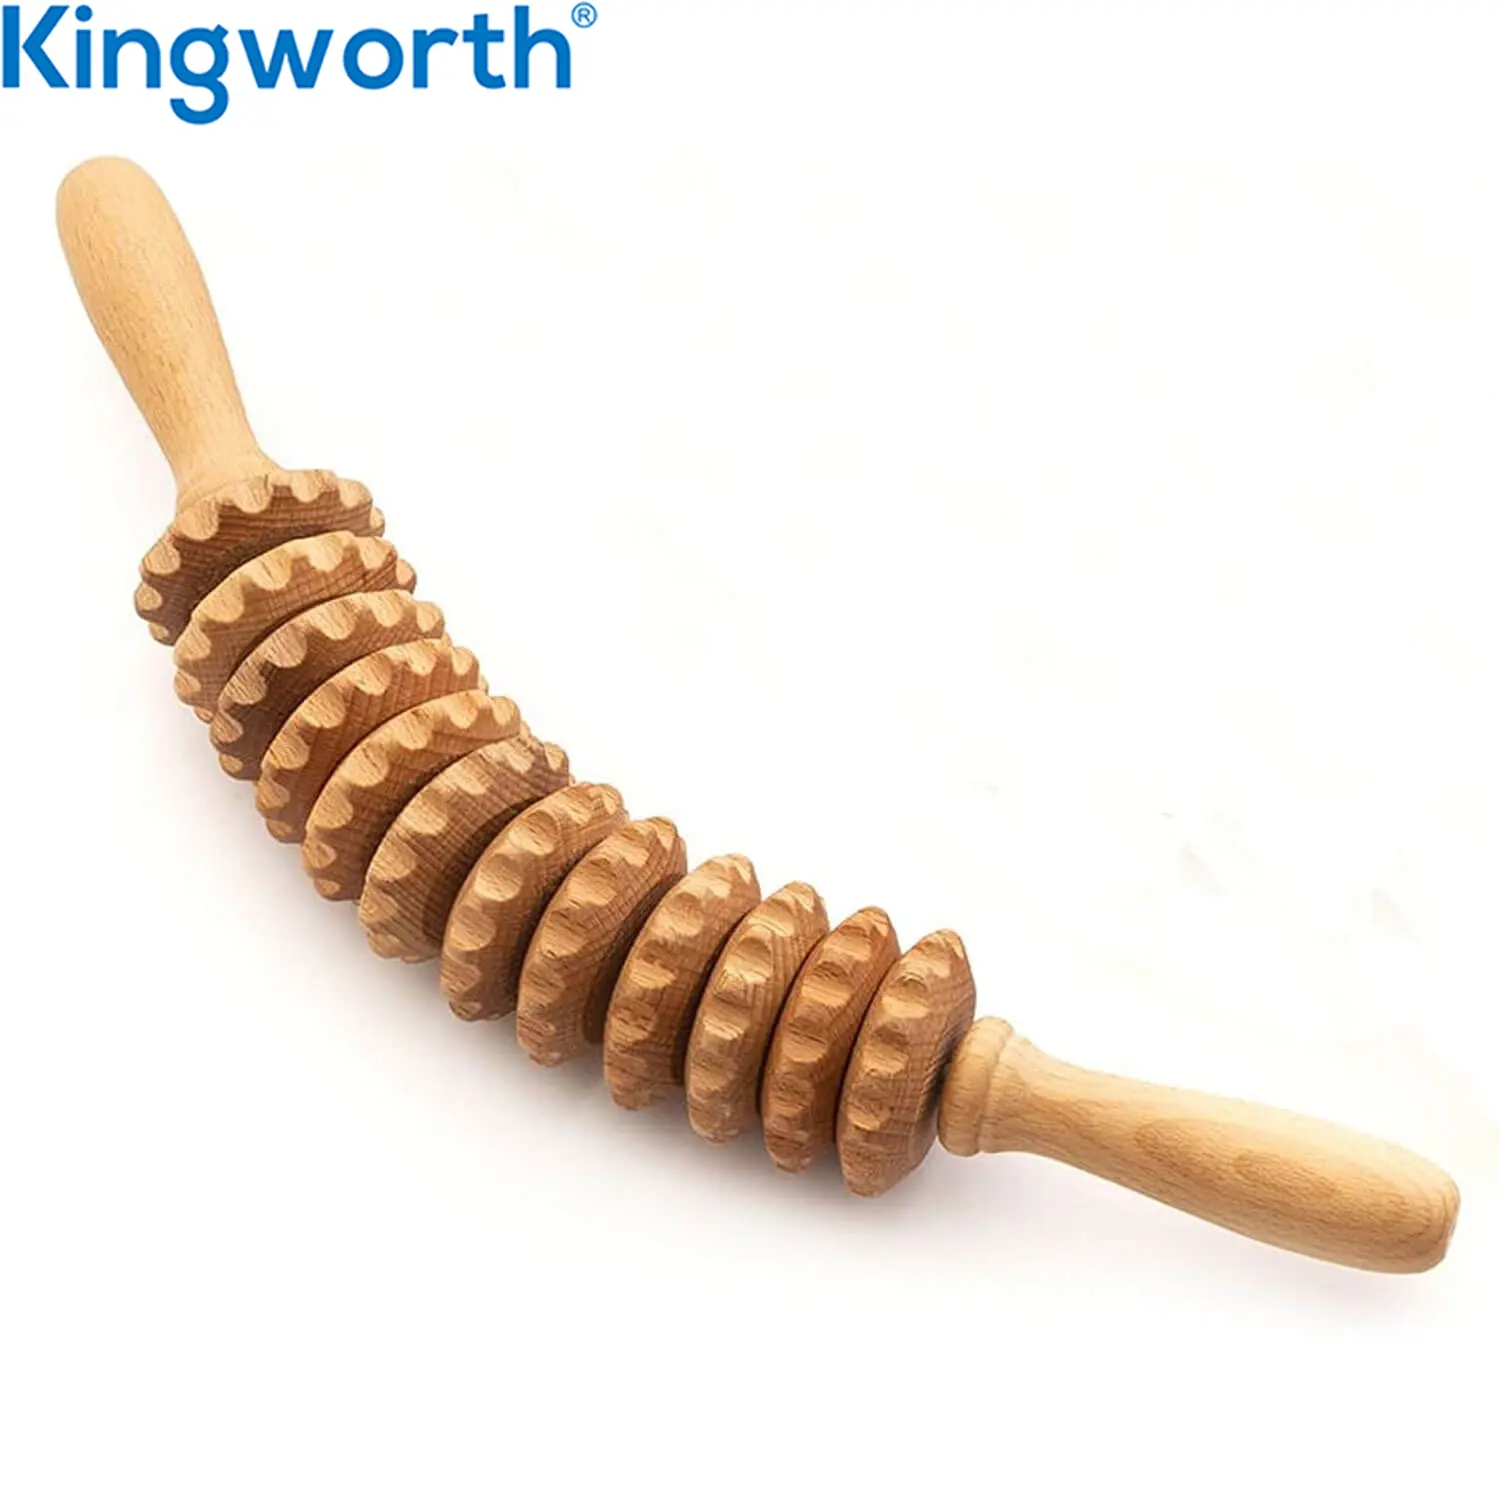 Kingworth Curved Wooden Therapy Cellulite Massage Roller Lymphatic Drainage Massager